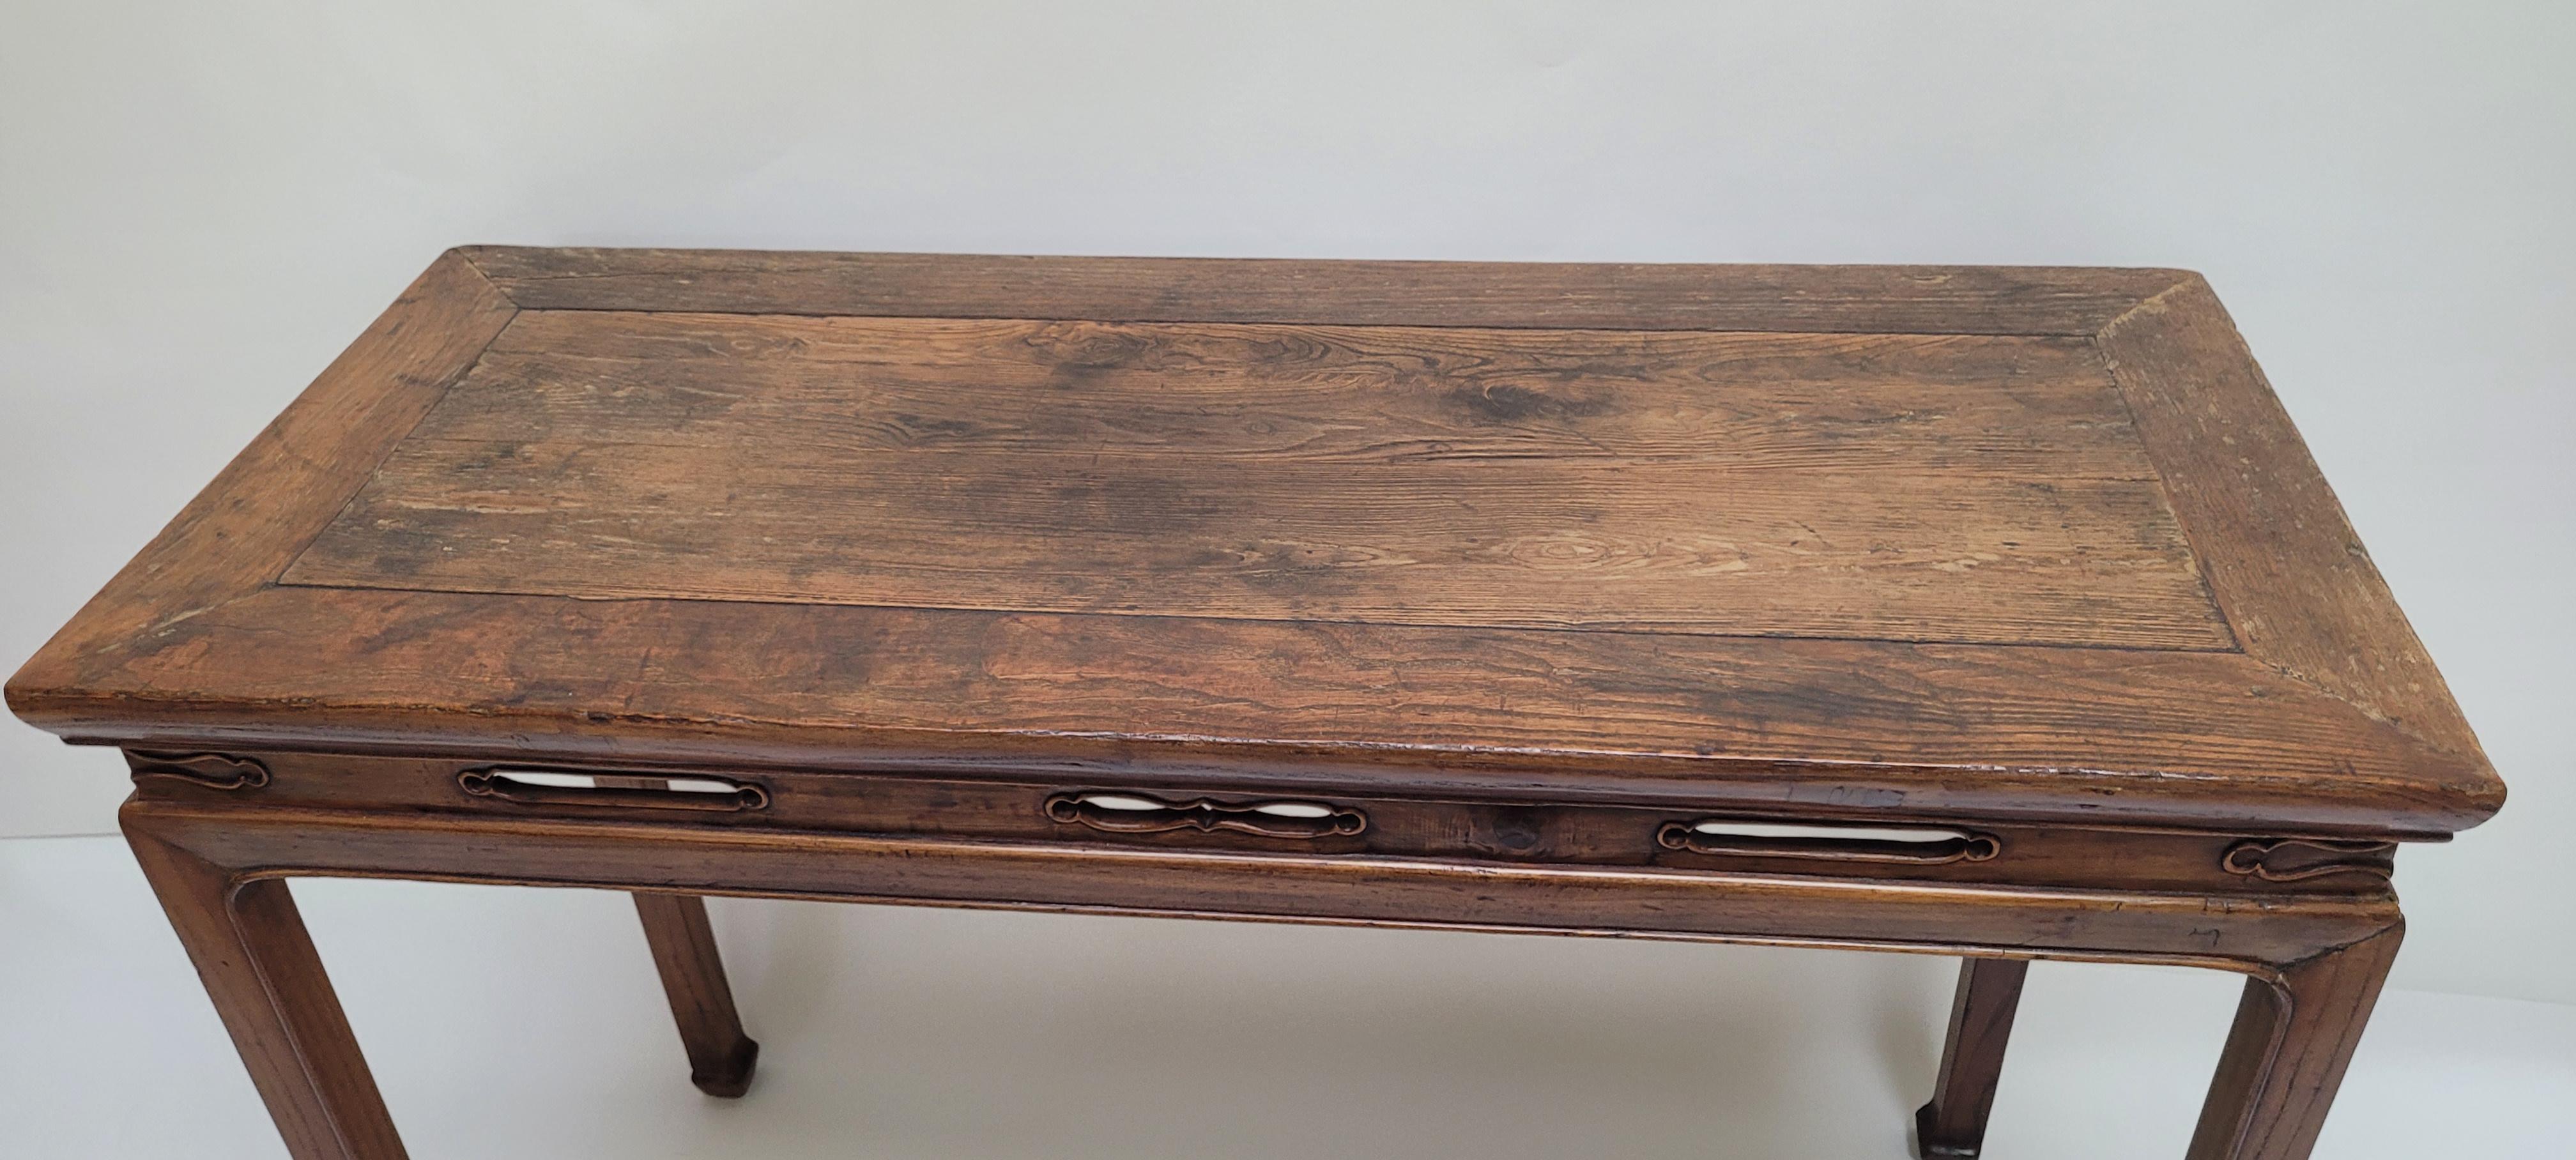 18th Century Side Table In Good Condition For Sale In Santa Monica, CA